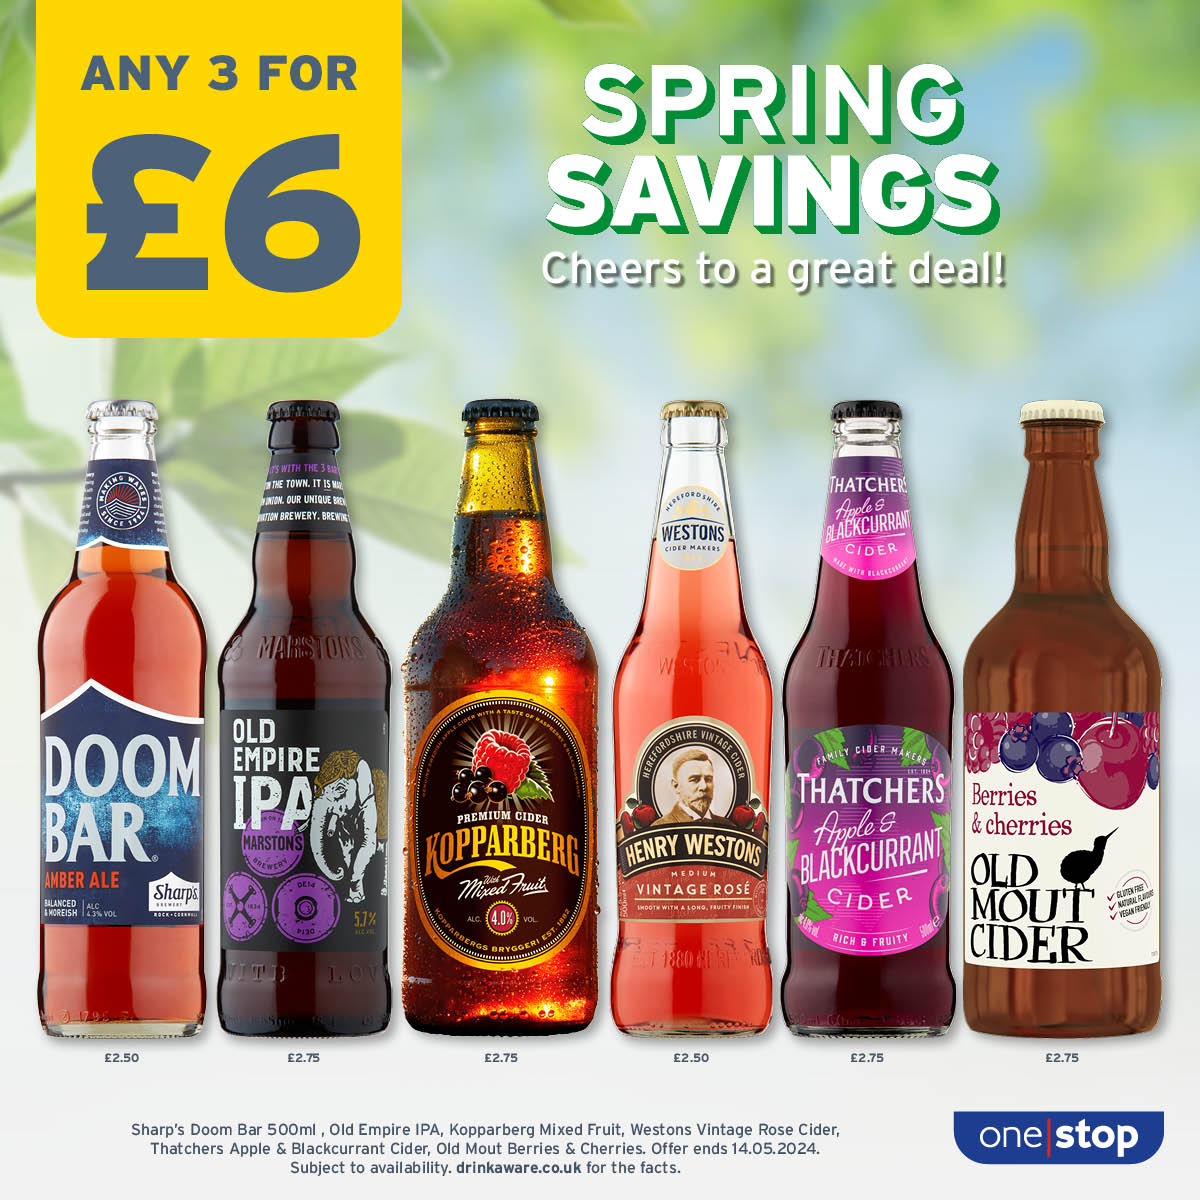 Enjoy the bank holiday with these great offers 👏🤩 Find your local store 👉 onestop.co.uk/store-finder/ Subject to availability. Participating stores only. Visit drinkaware.co.uk for the facts